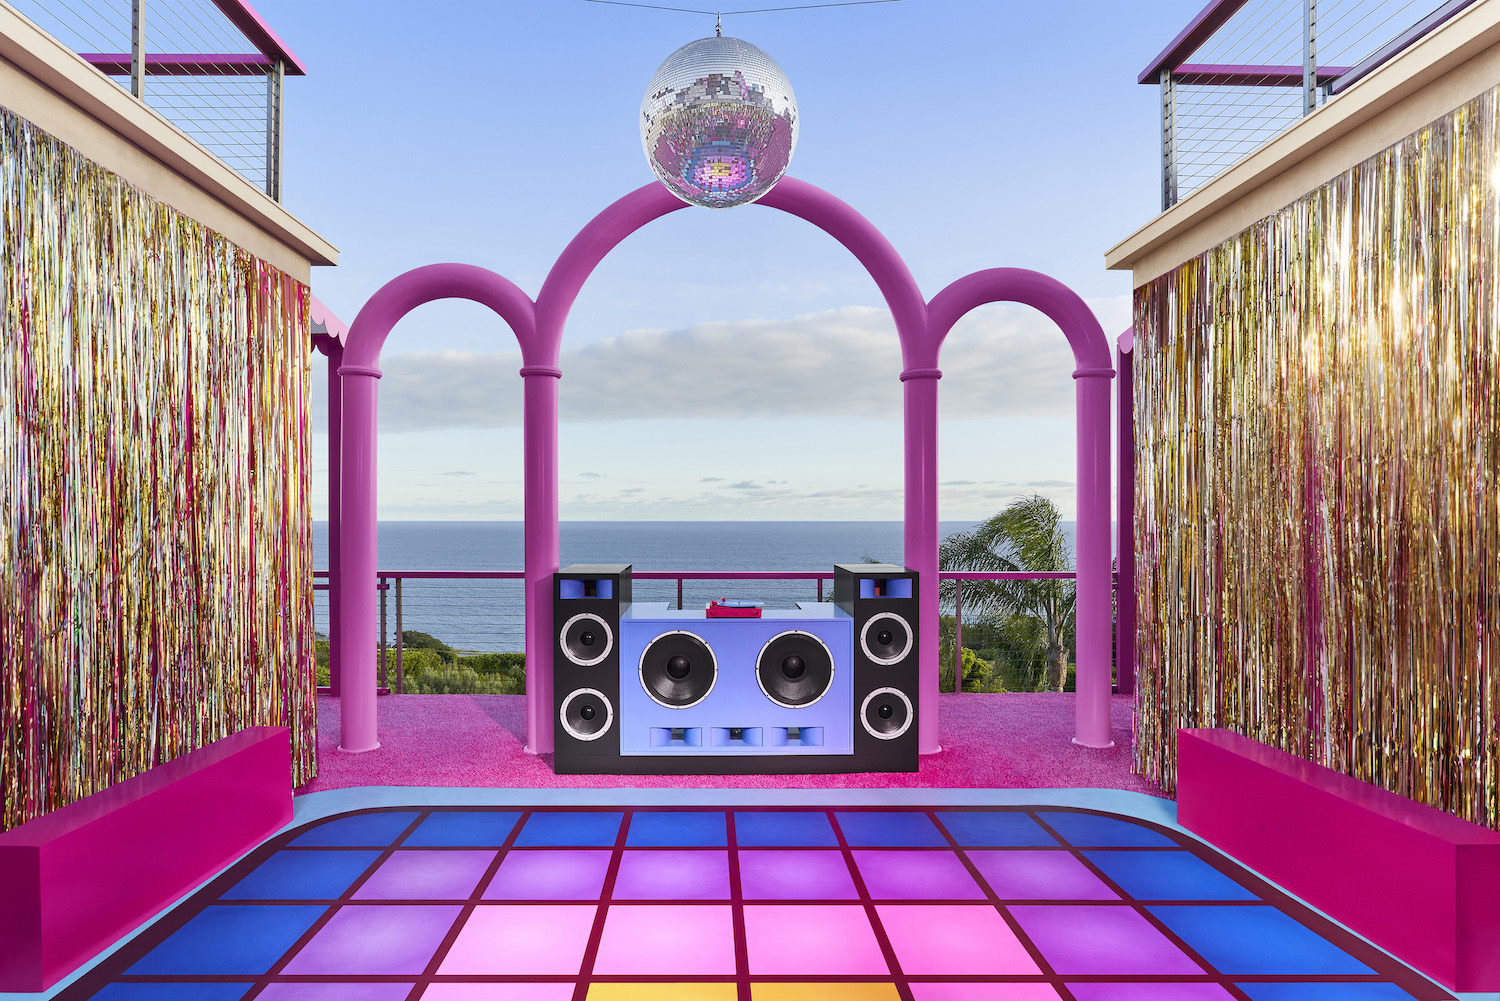 Barbie's Malibu DreamHouse is back on Airbnb – but this time, Ken's hosting